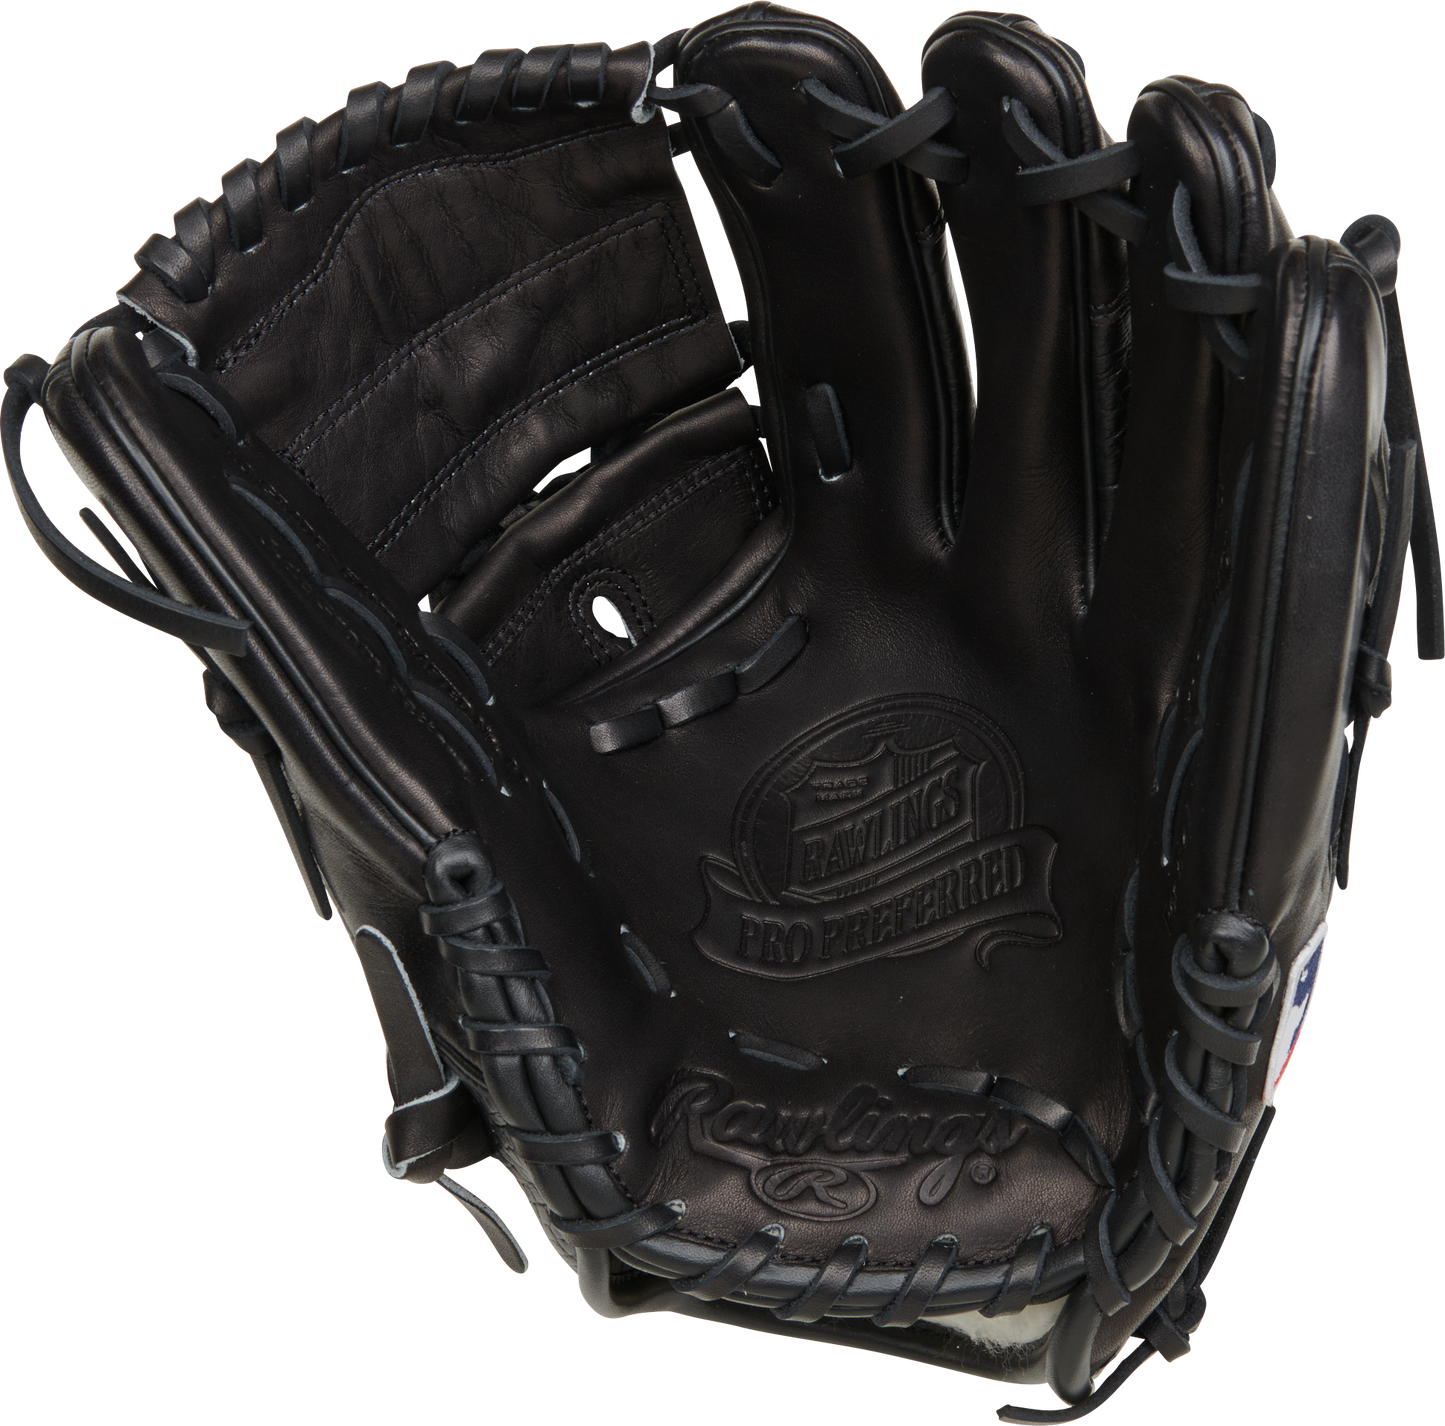 RAWLINGS PRO PREFERRED 11.75-INCH JACOB DEGROM PITCHING GLOVE